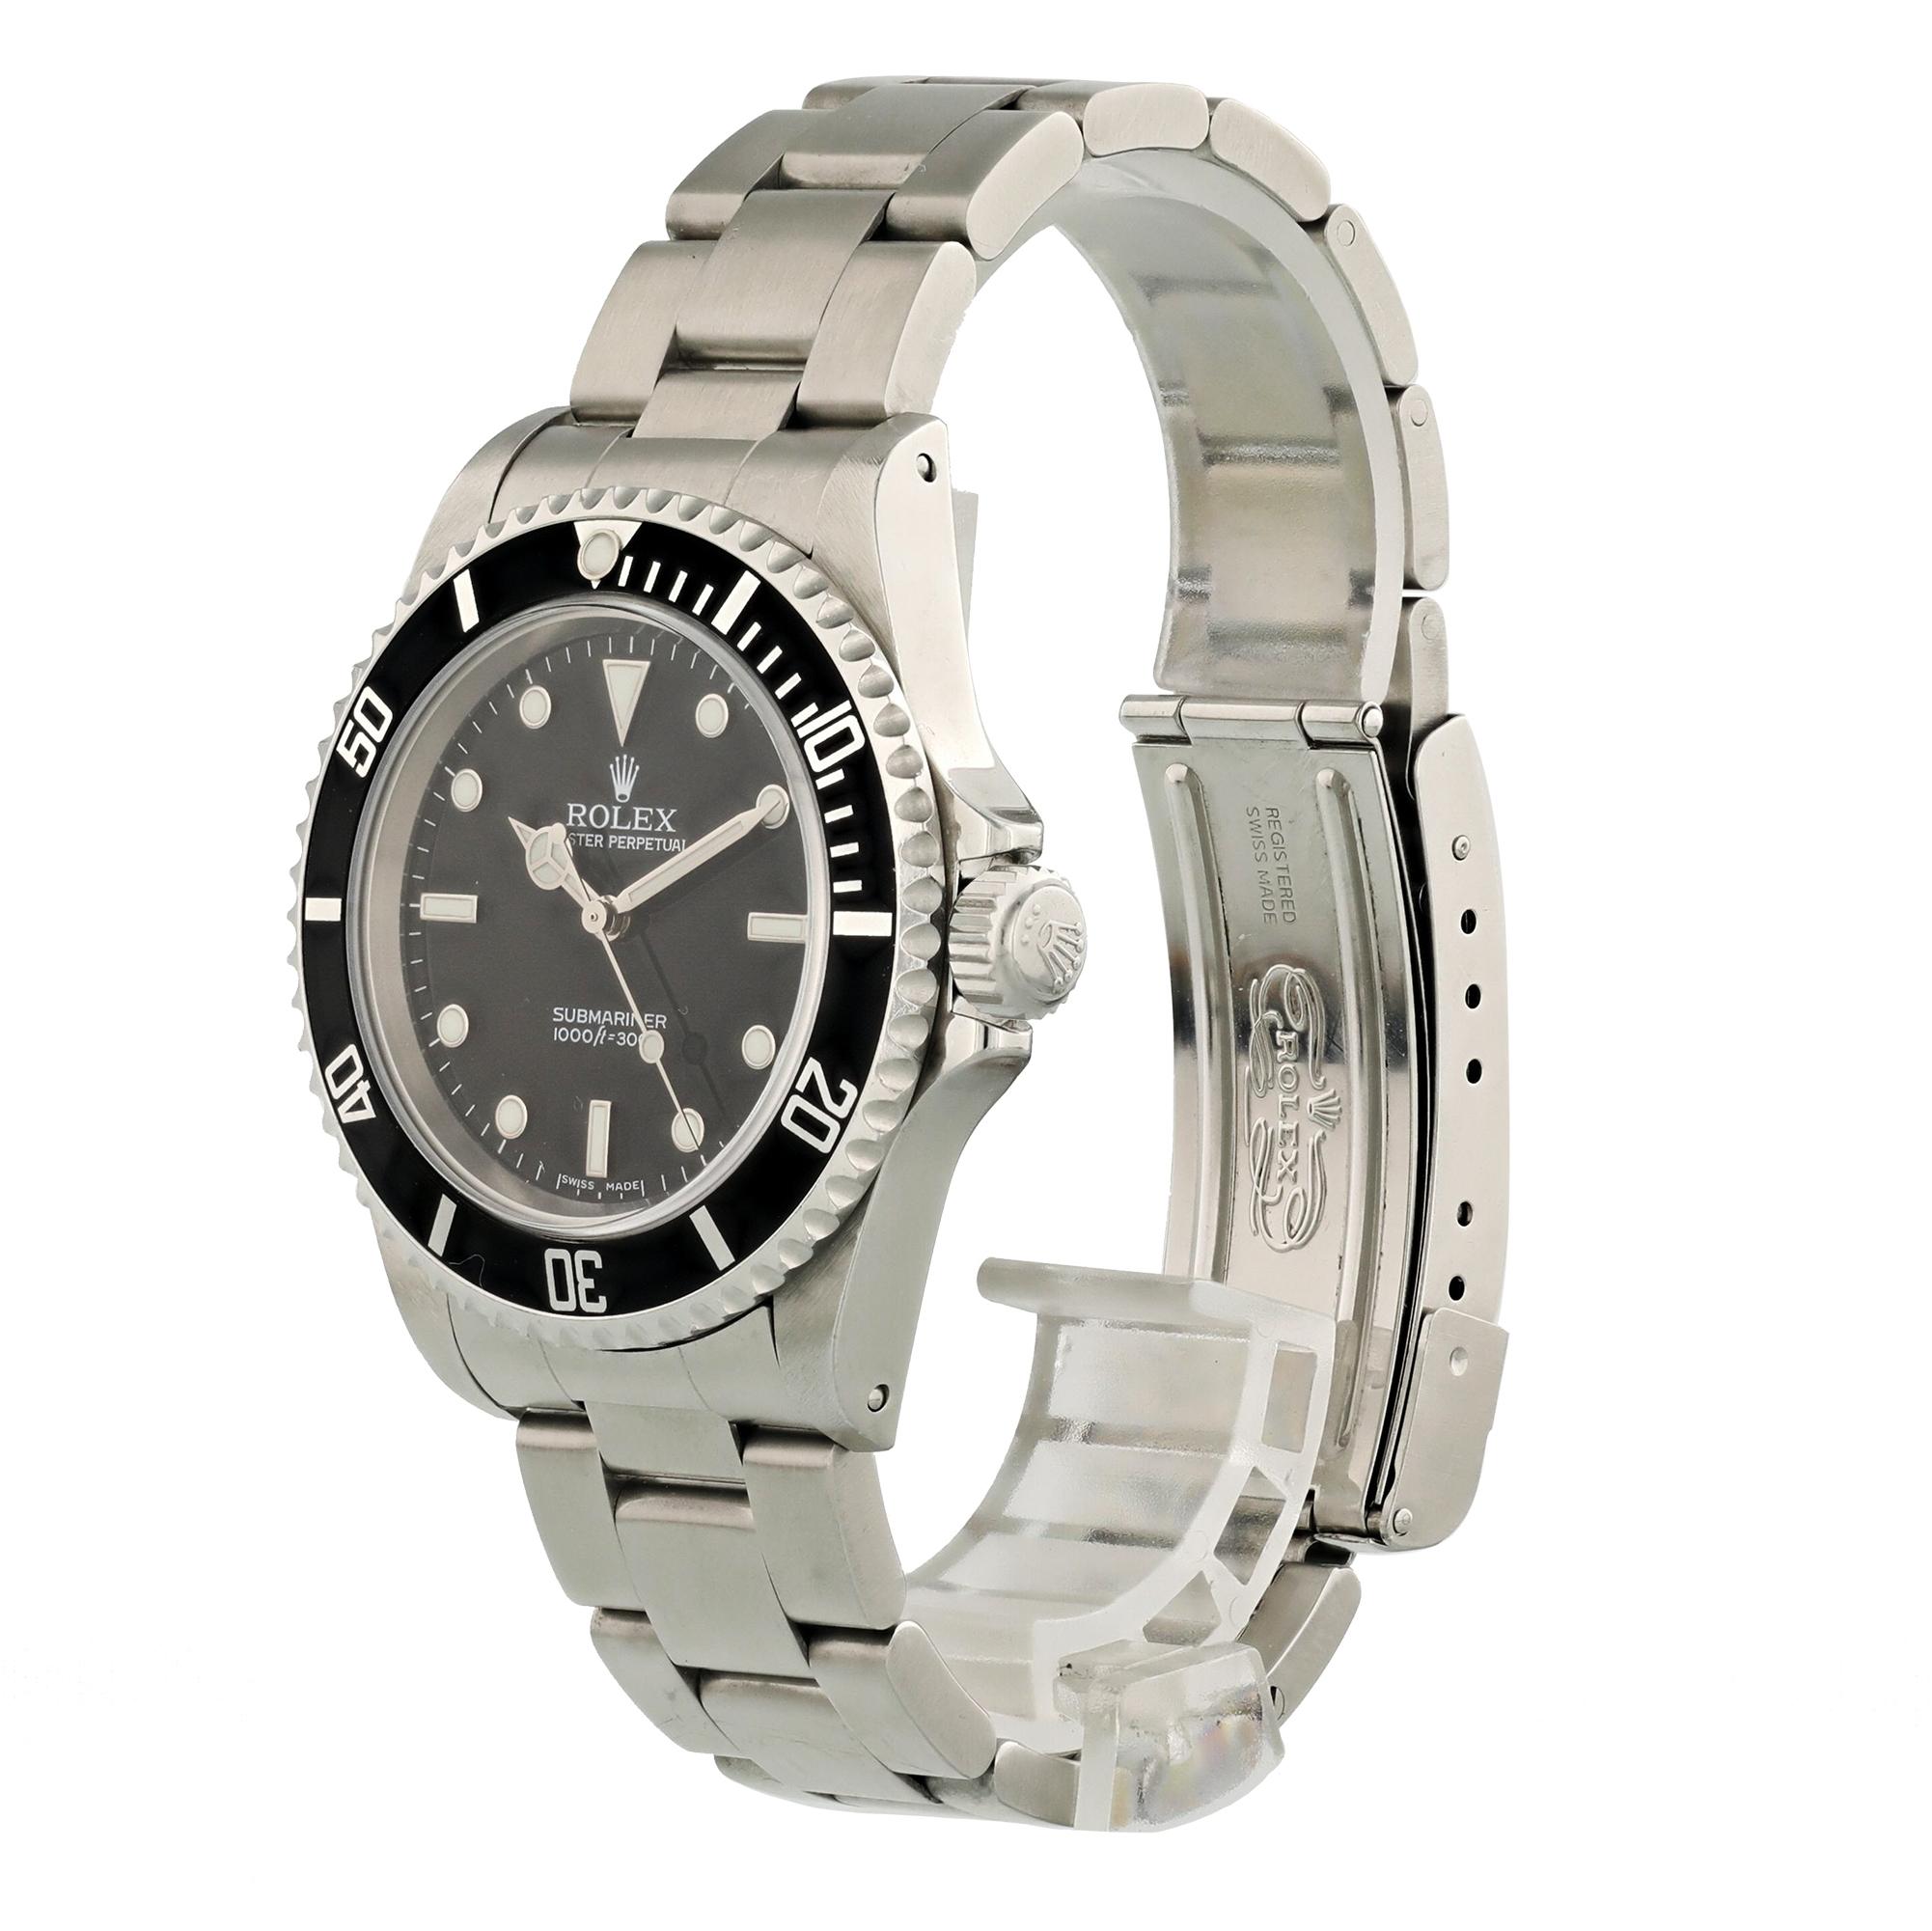 Rolex Submariner 14060M Men Watch. 
40mm Stainless Steel case. 
Stainless Steel Unidirectional bezel. 
Black dial with luminous gold hands and index hour markers. 
Minute markers on the outer dial. 
Stainless Steel Bracelet with Fold Over Clasp.